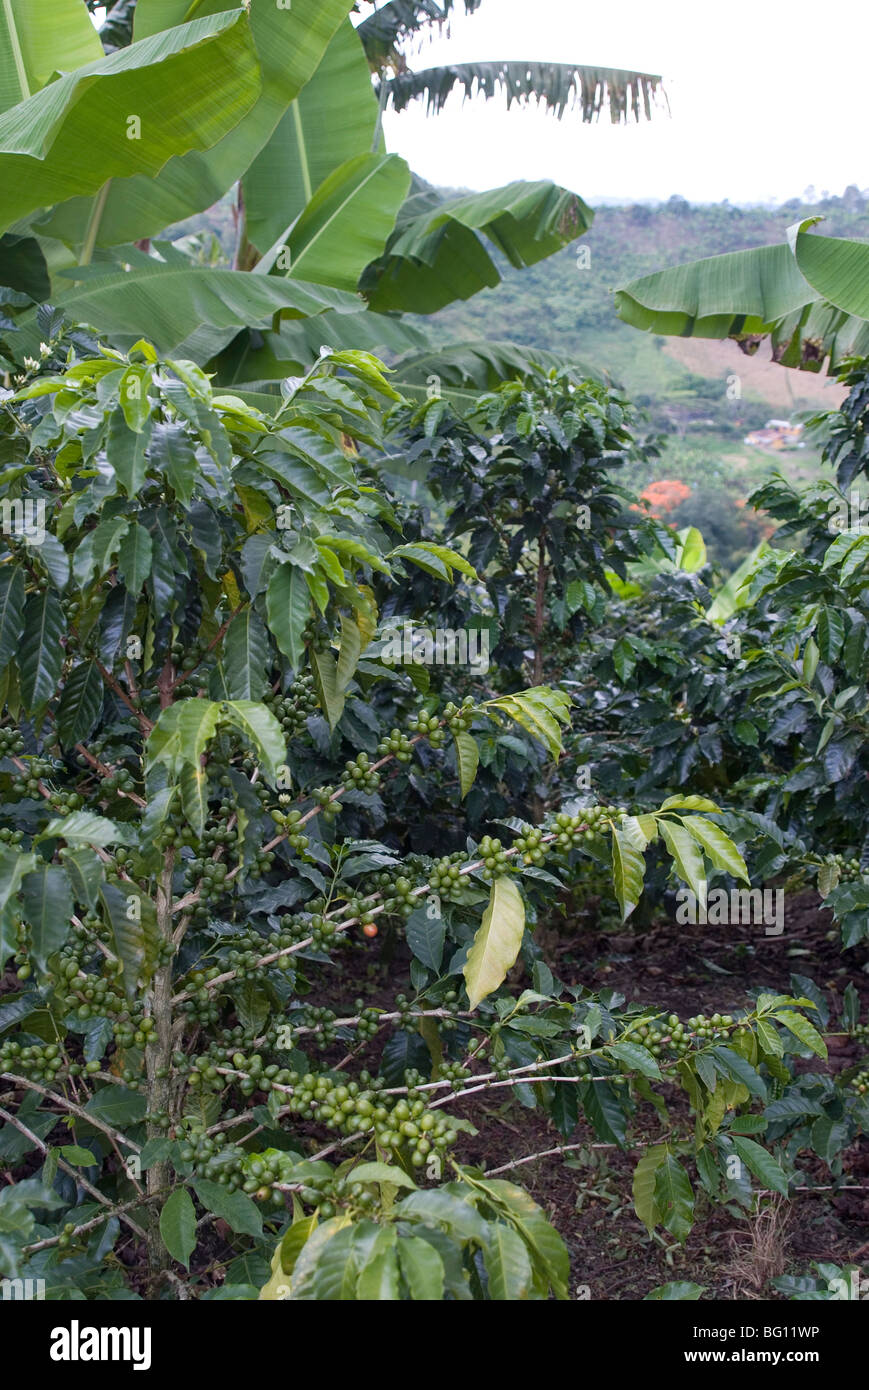 Coffee beans growing on the vine, Recuca Coffee, near Armenia, Colombia, South America Stock Photo